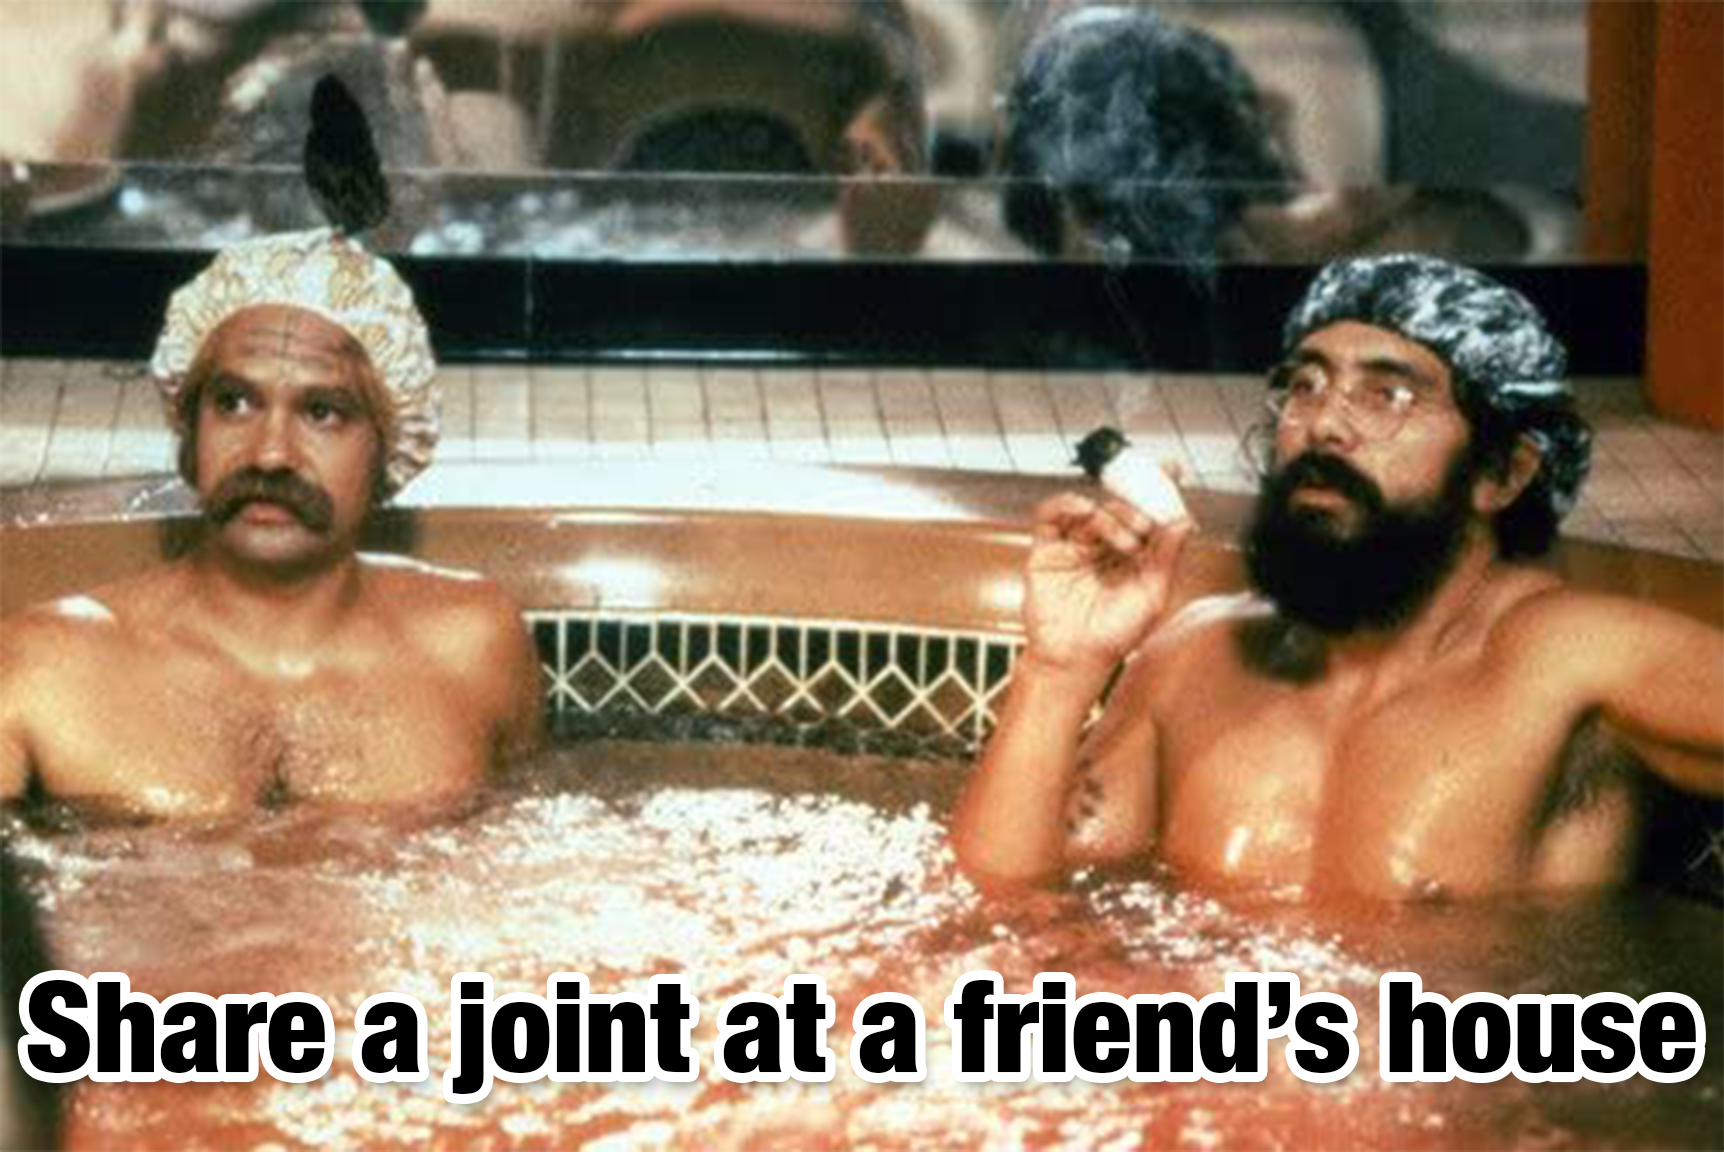 cool pics - cheech and chong - share a joint at a friend's house